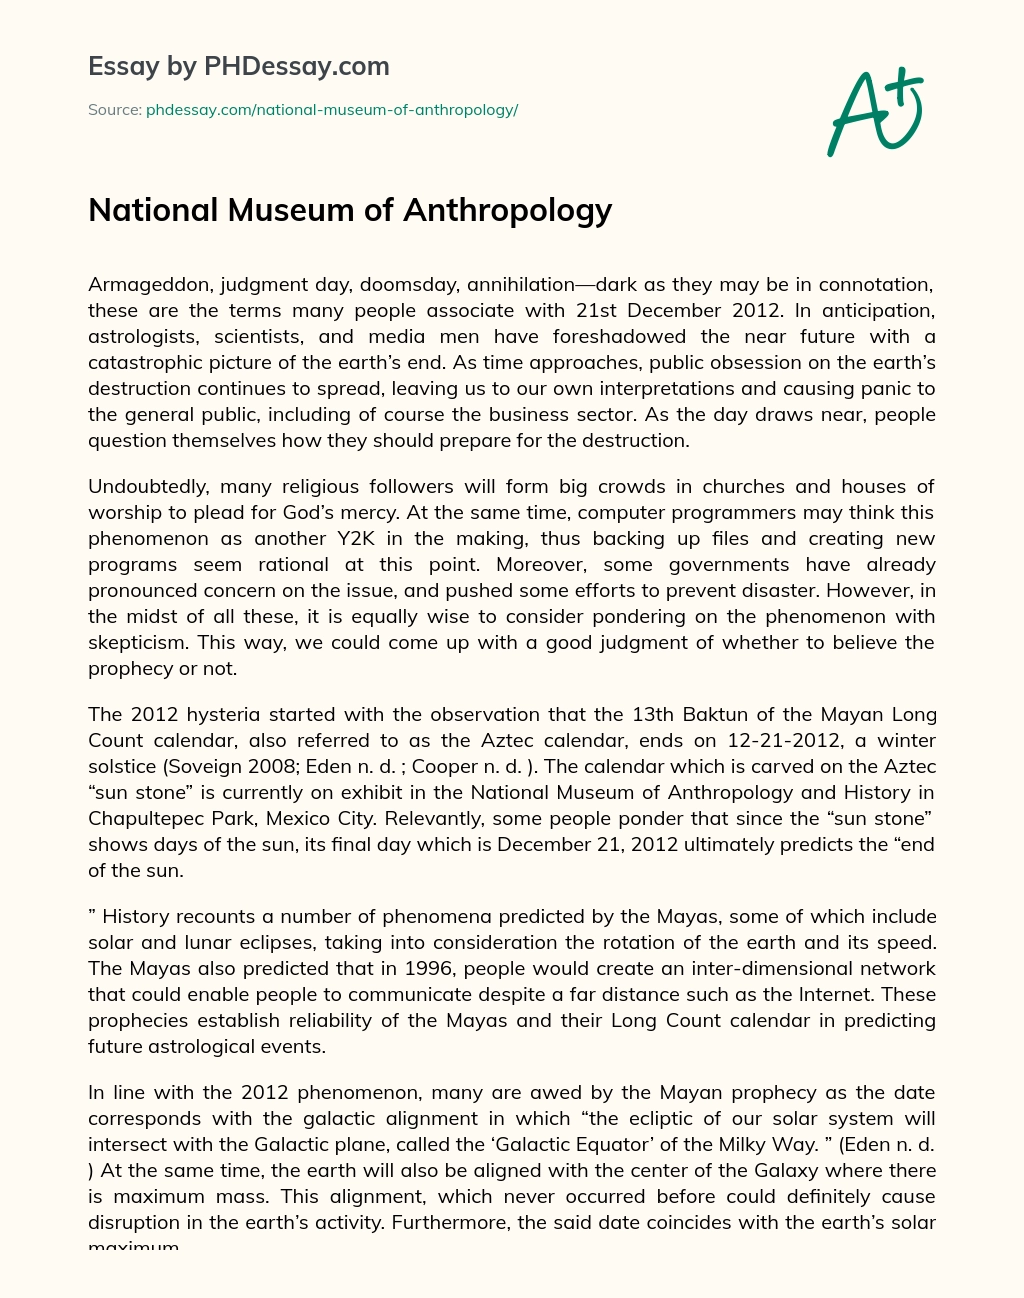 National Museum of Anthropology essay